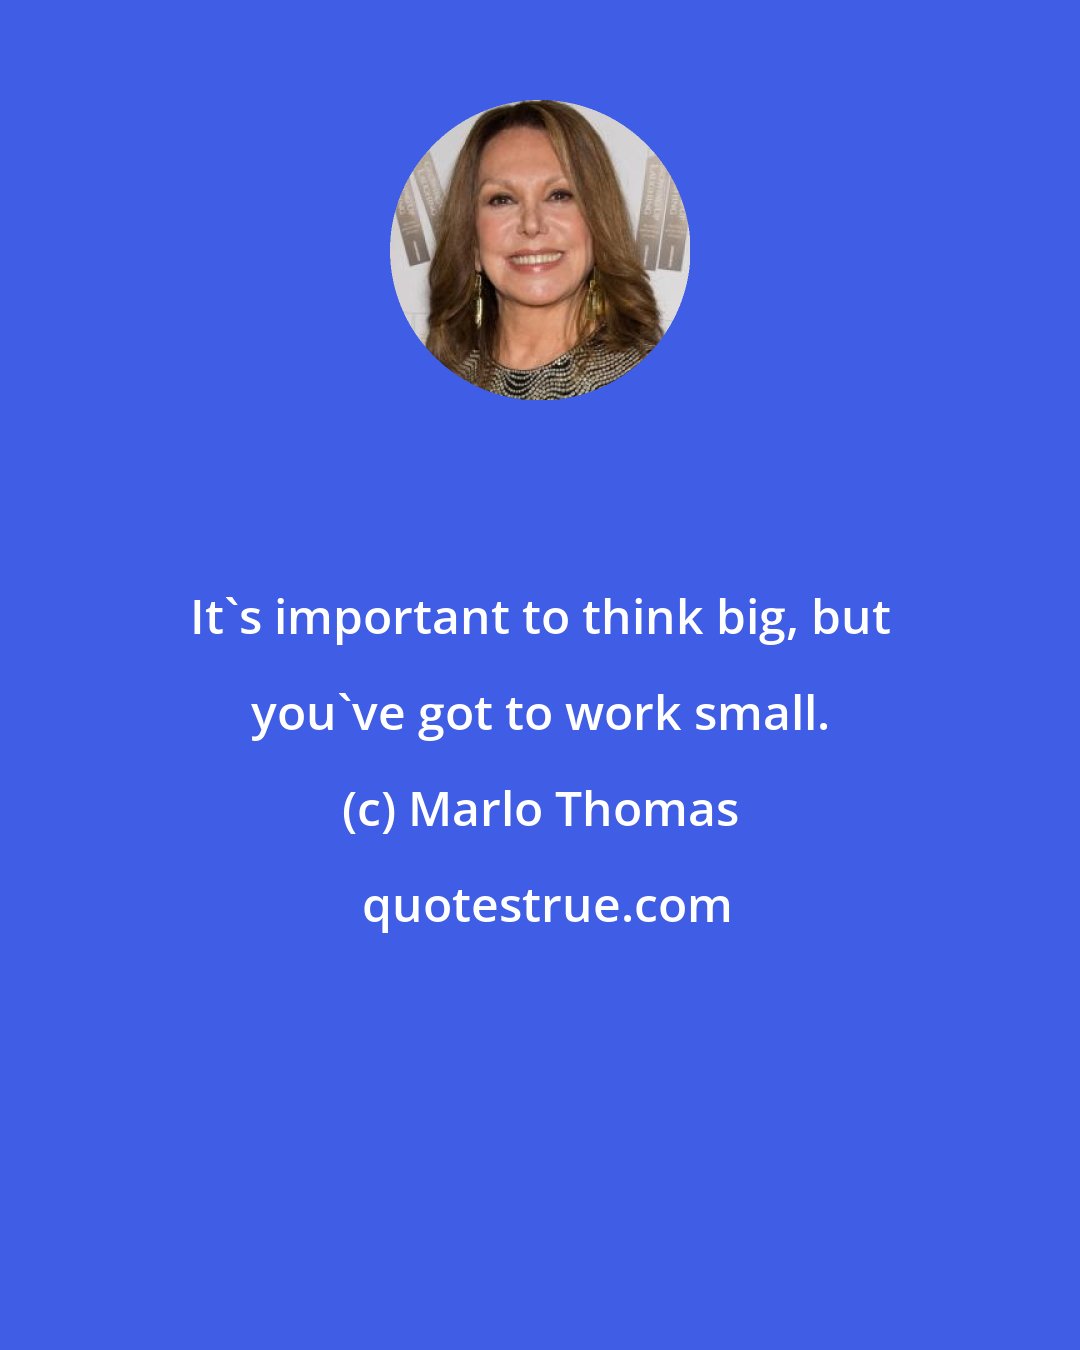 Marlo Thomas: It's important to think big, but you've got to work small.